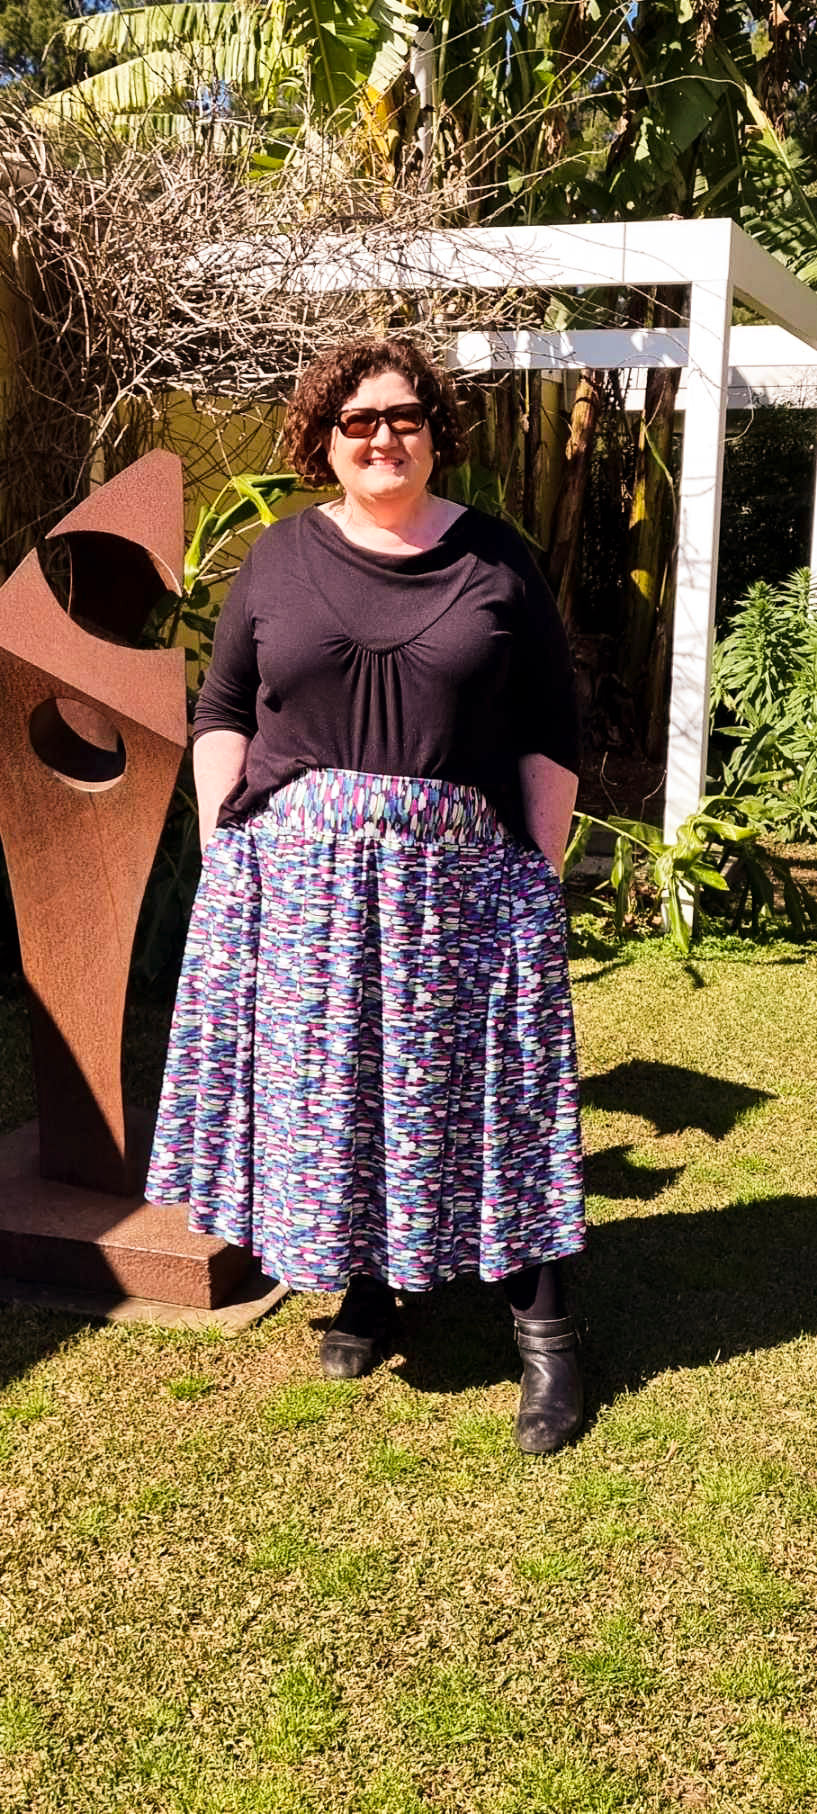 Elysian Culottes and Skirt